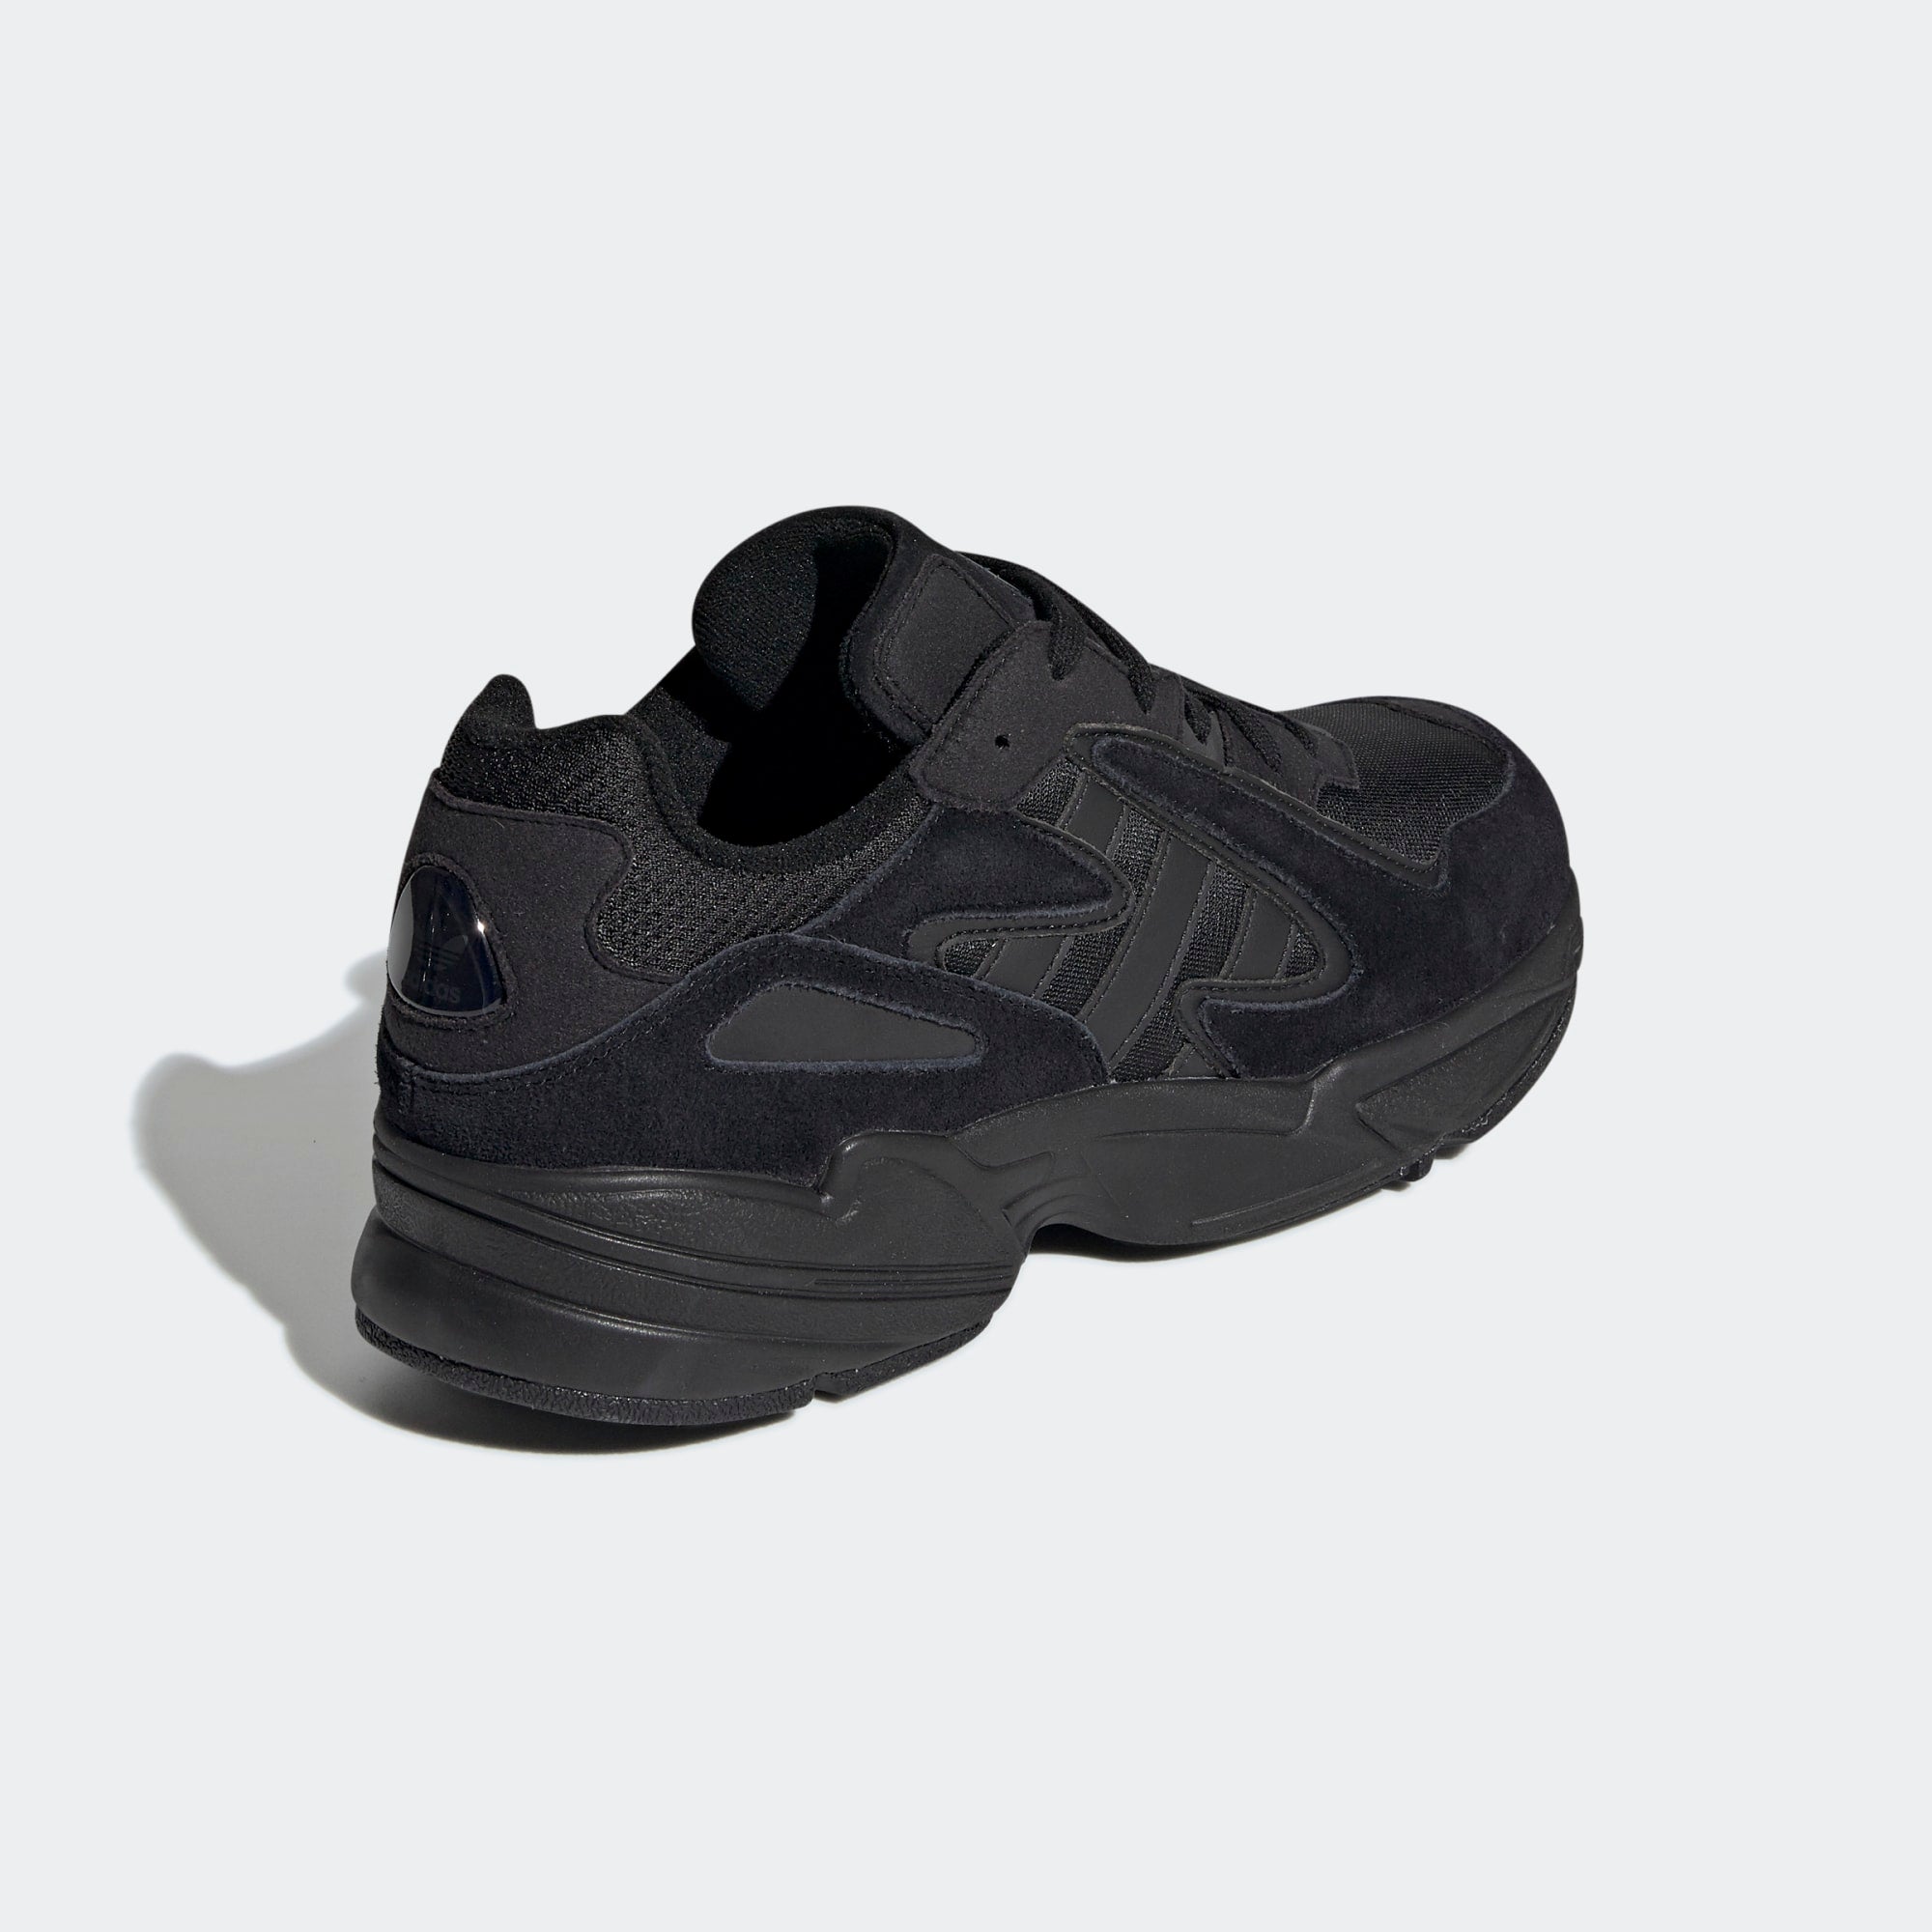 adidas Yung-96 Chasm Shoes Black EE7239 